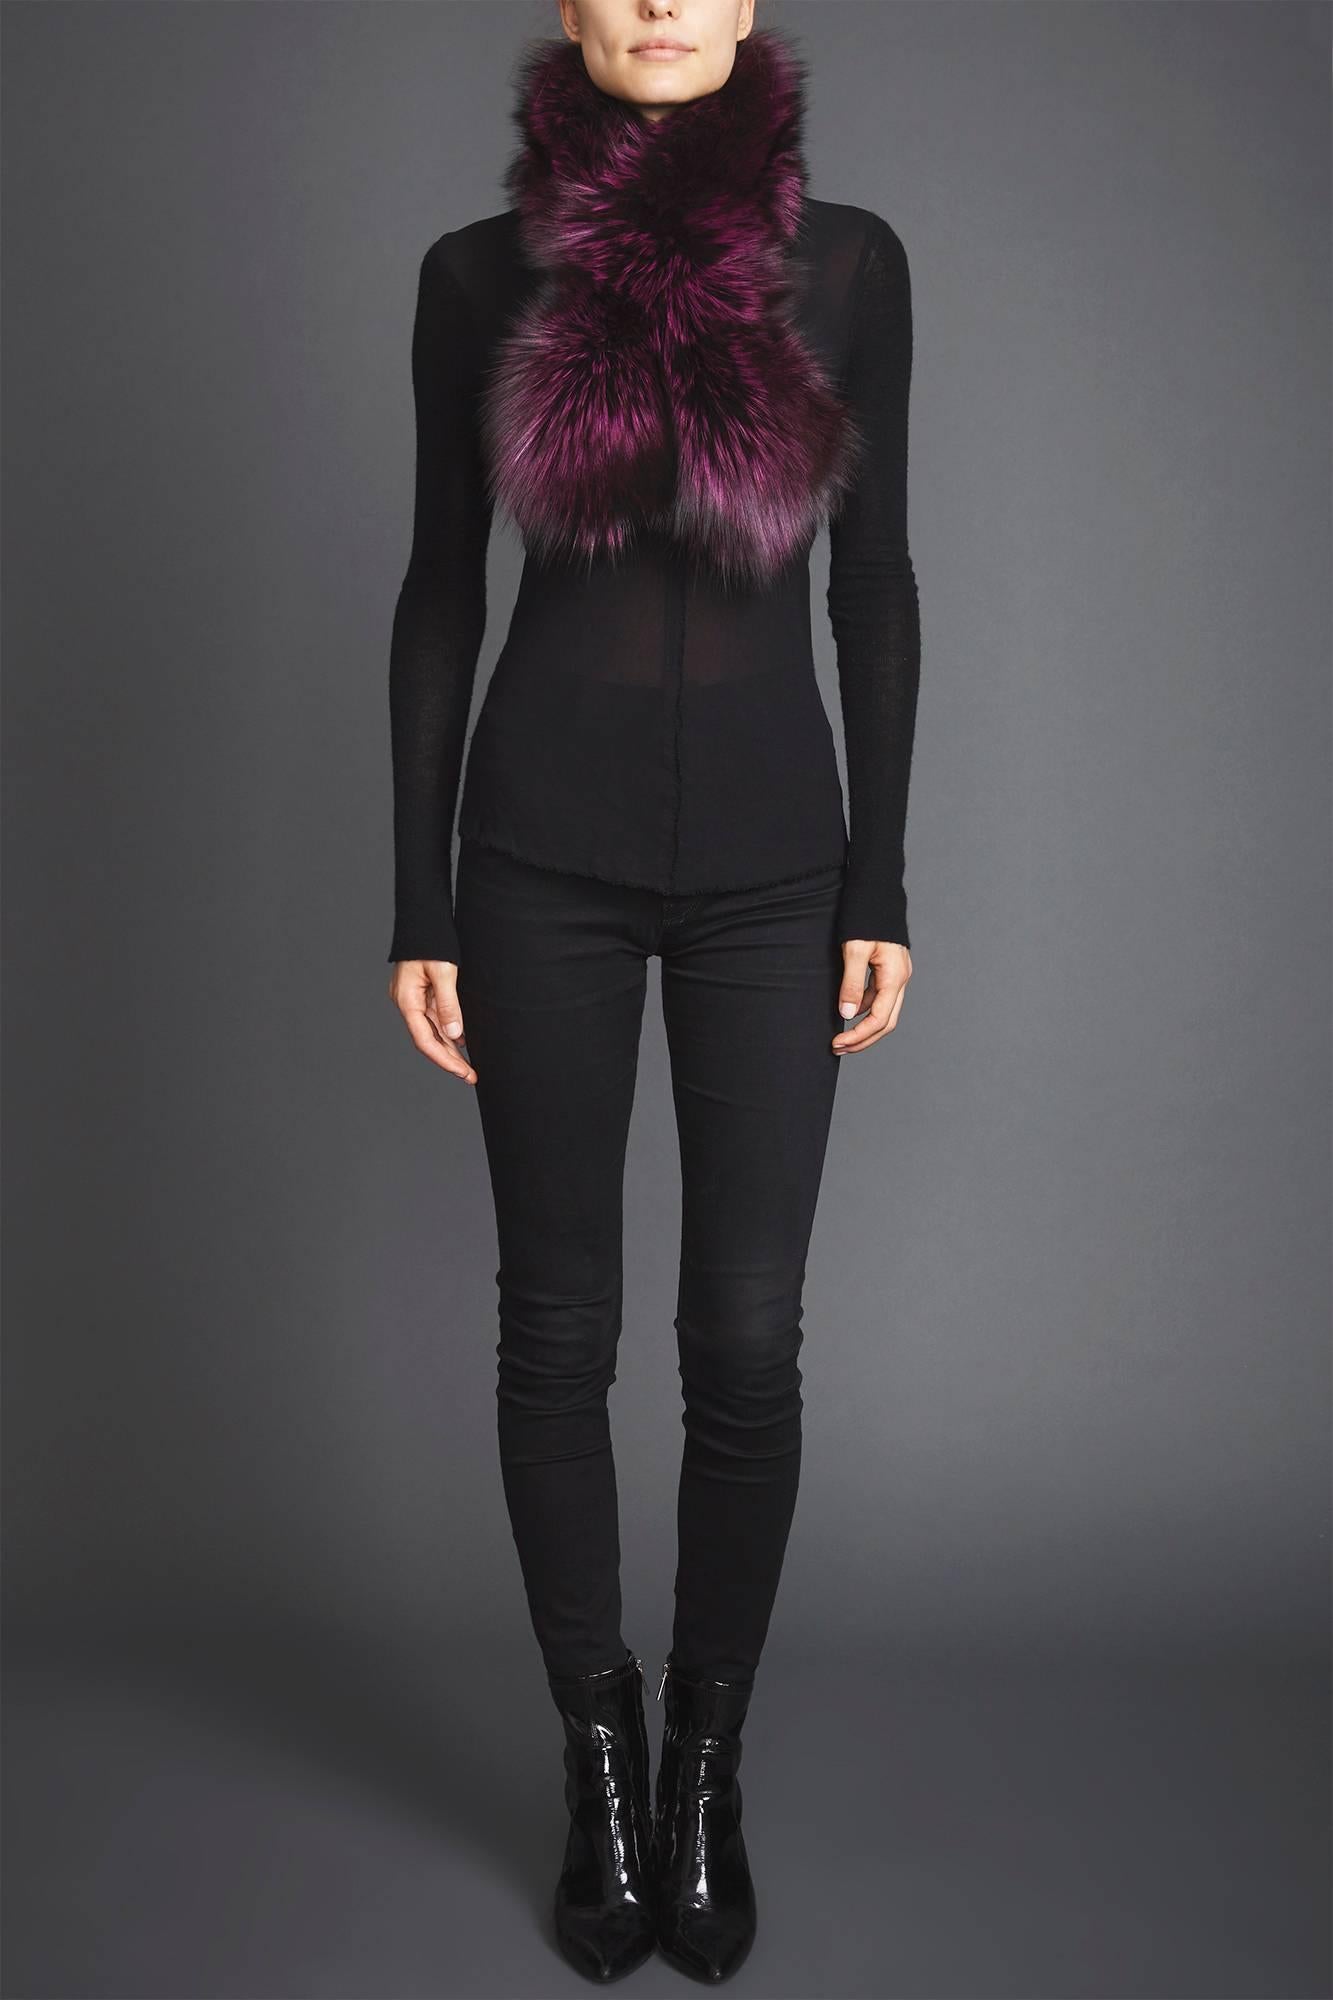 Verheyen London Lapel Cross-through Collar Stole in Purple Fox Fur 

The Lapel Cross-through Collar is Verheyen London’s casual everyday design, which is perfectly shaped to wear over any outfit.  Designed for layering, this structured shape,